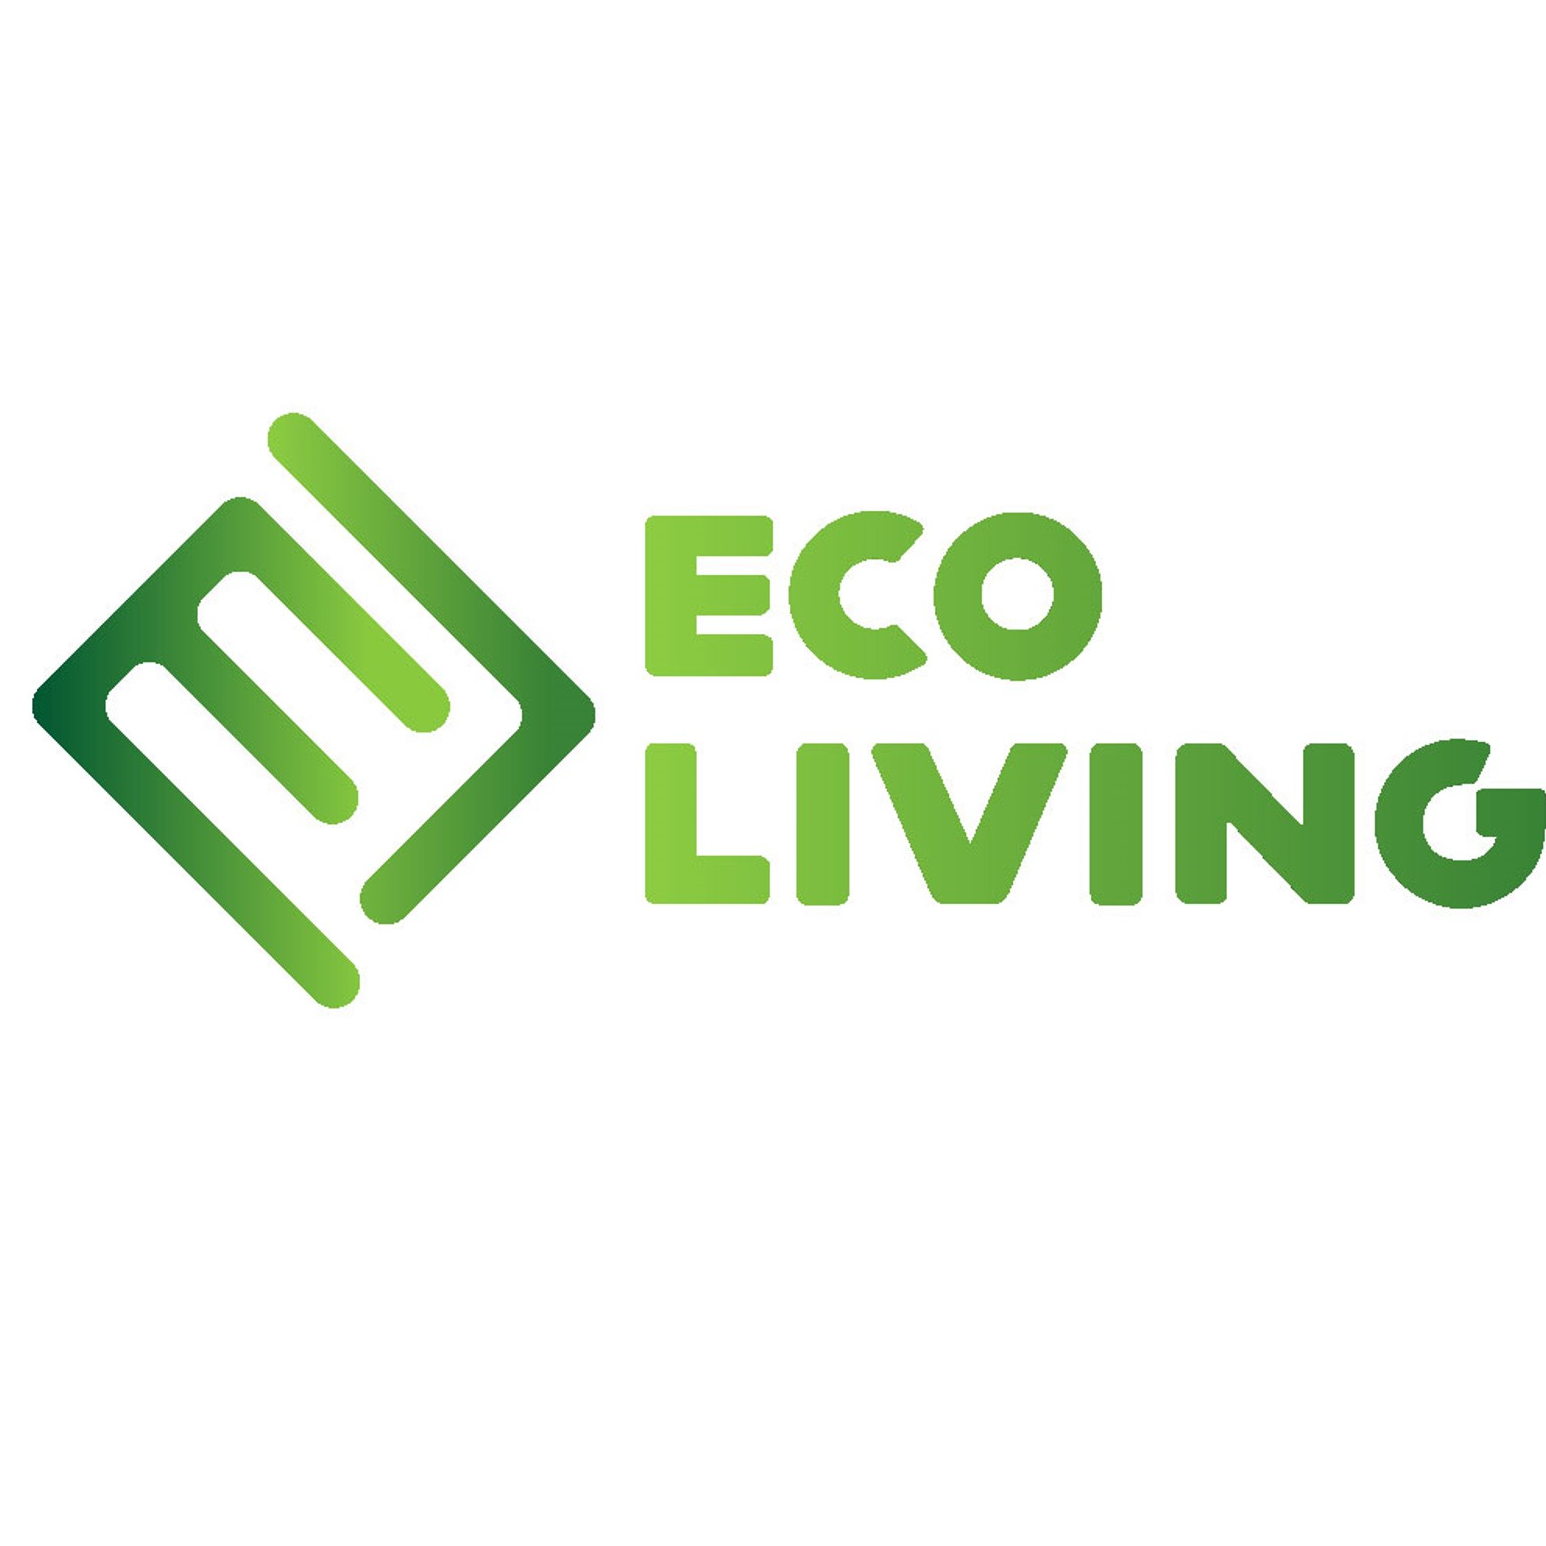 EcoLiving